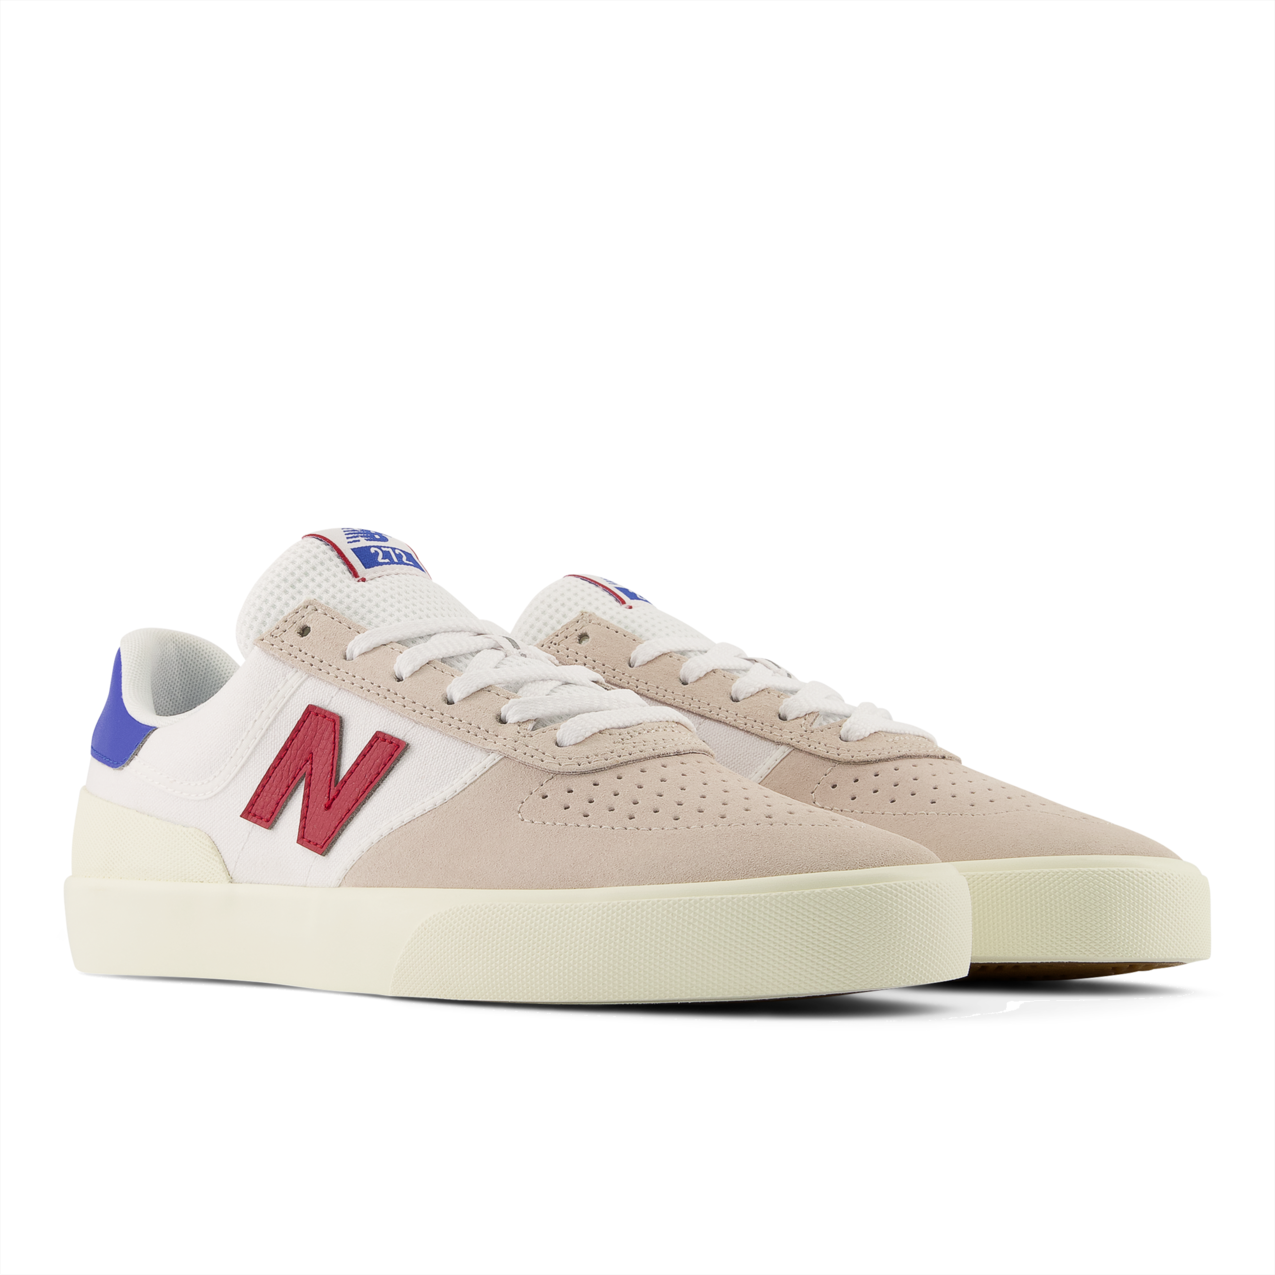 New Balance Numeric Men's 272 White Red Shoes